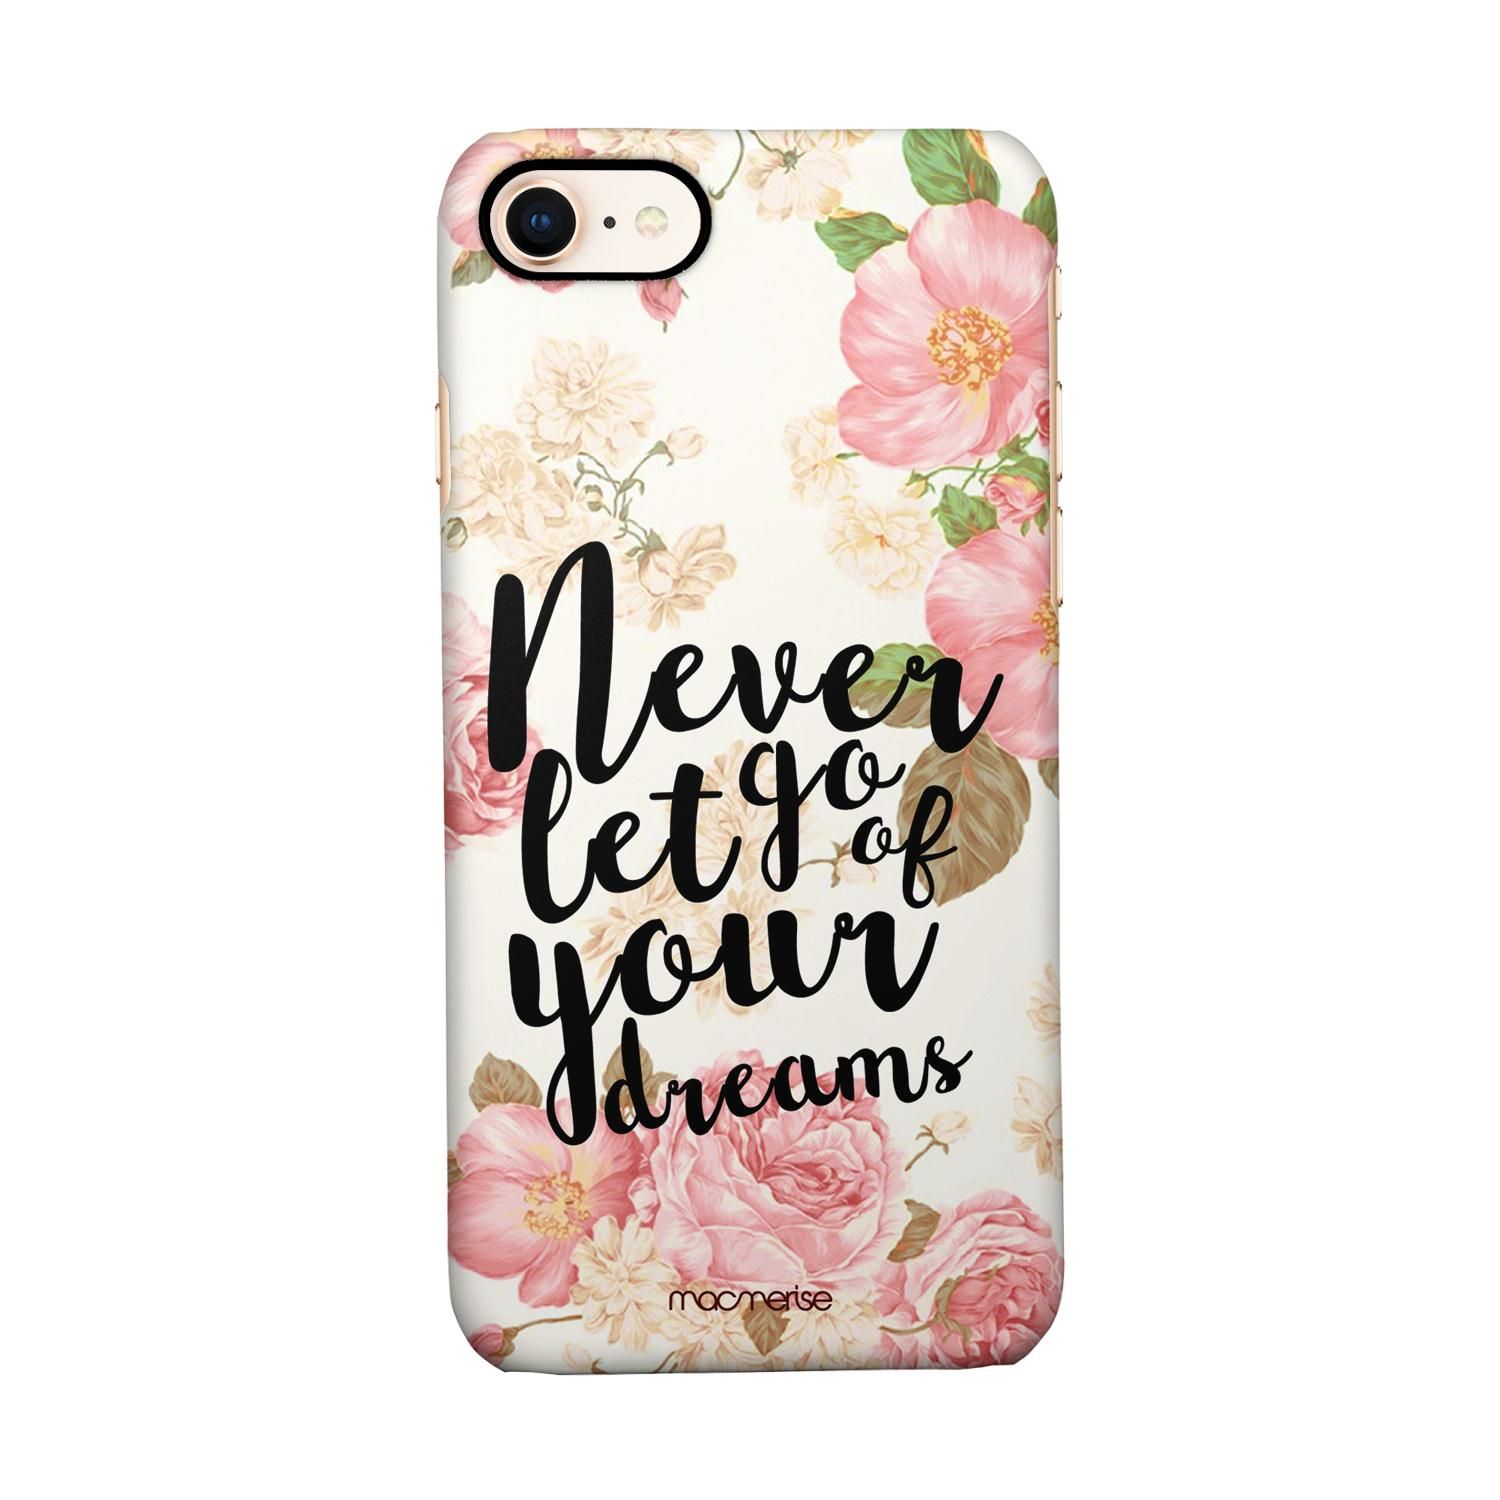 Buy Your Dreams - Sleek Phone Case for iPhone 7 Online